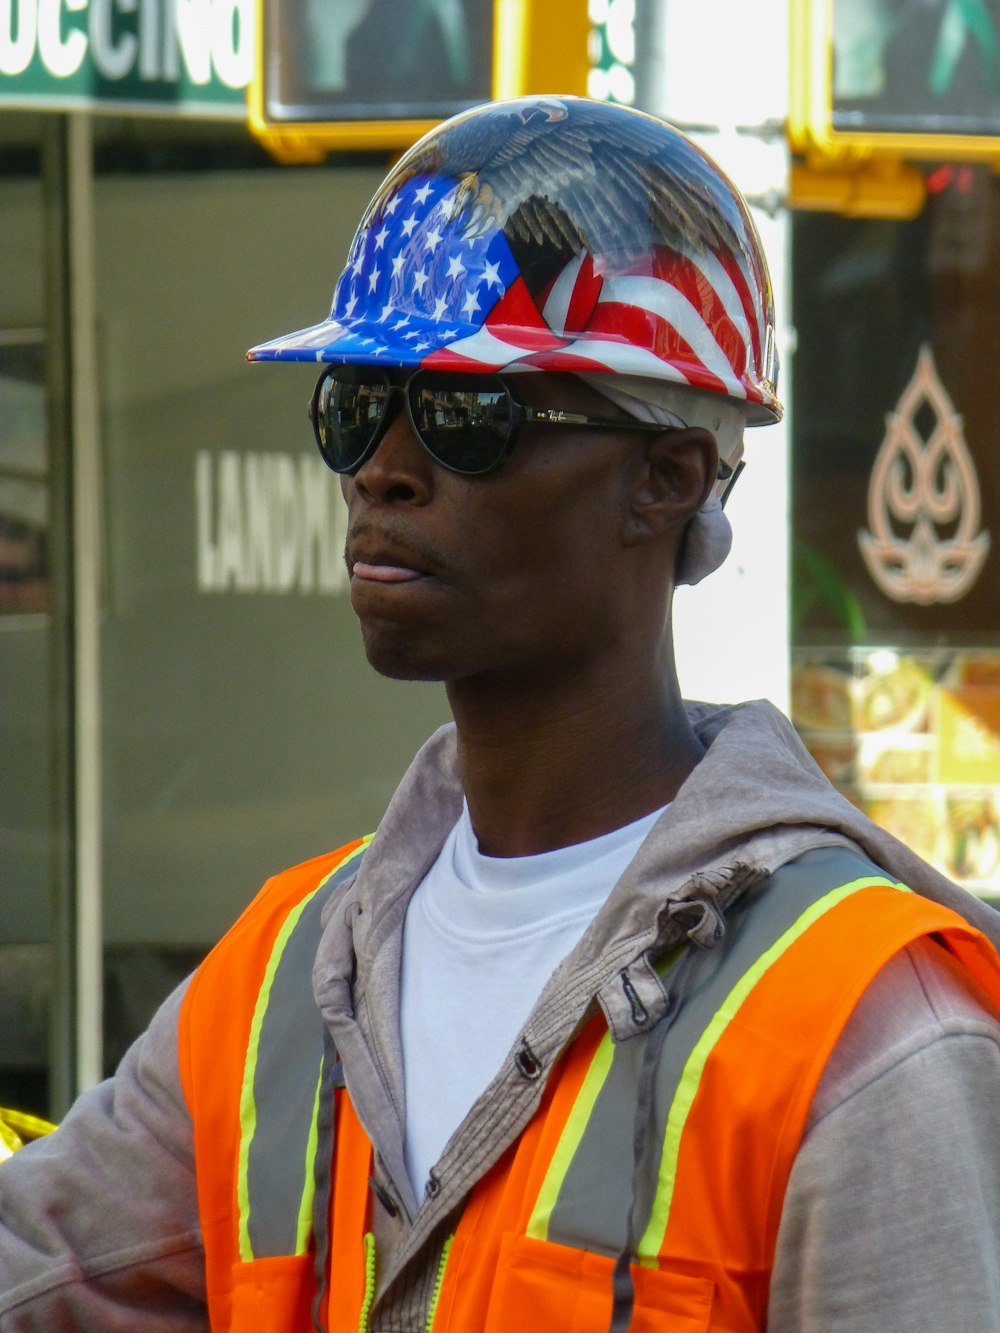 man in white and orange shirt wearing blue and white cap and black sunglasses